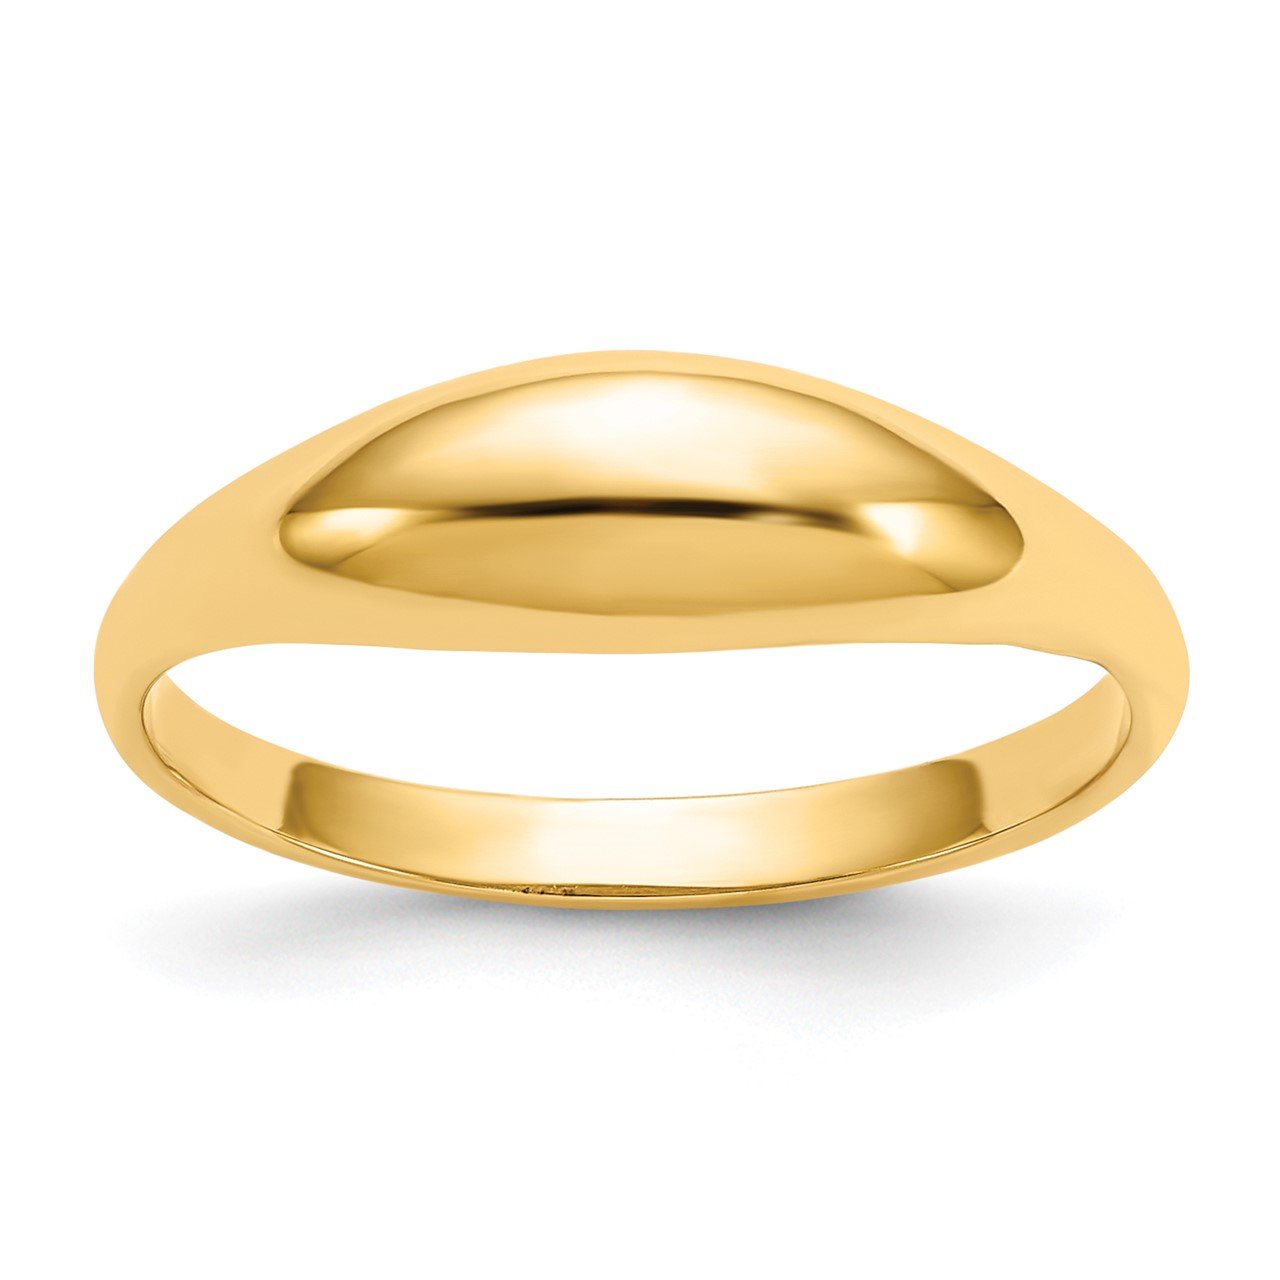 14k Childs Polished Dome Ring